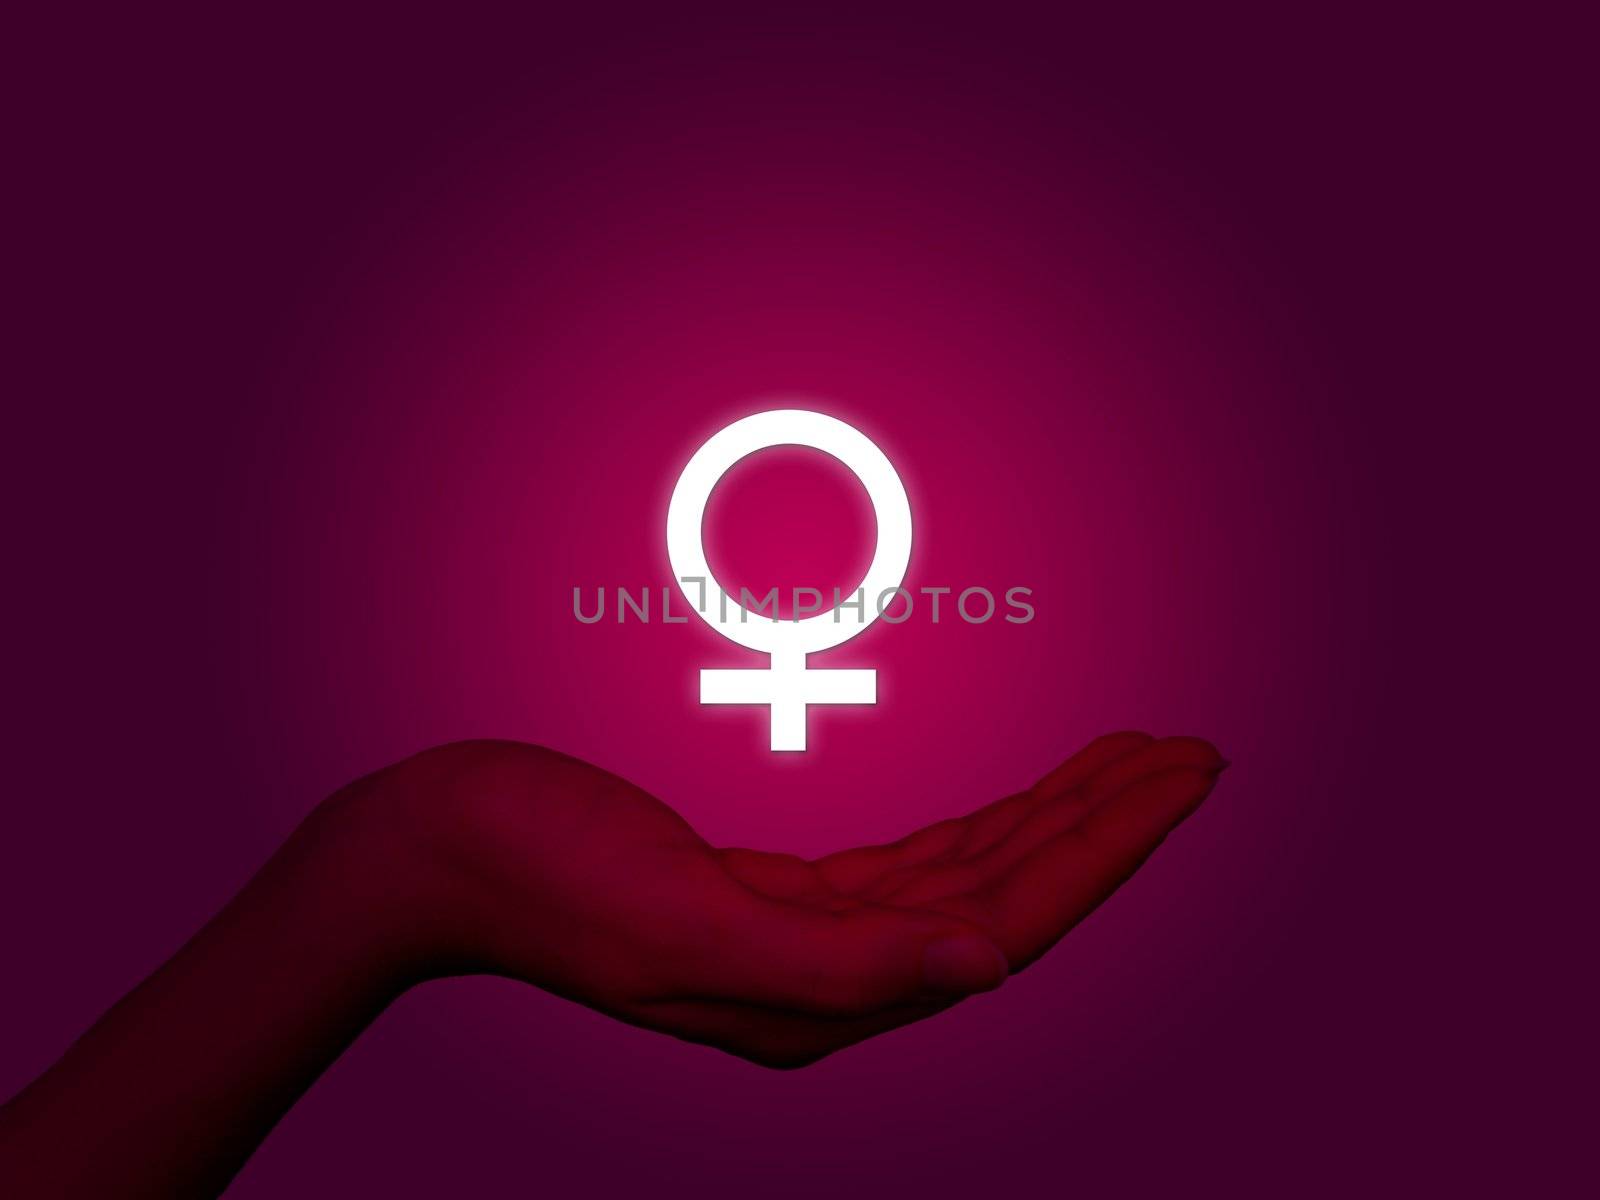 Shining female sex sign, woman's hand on pink background